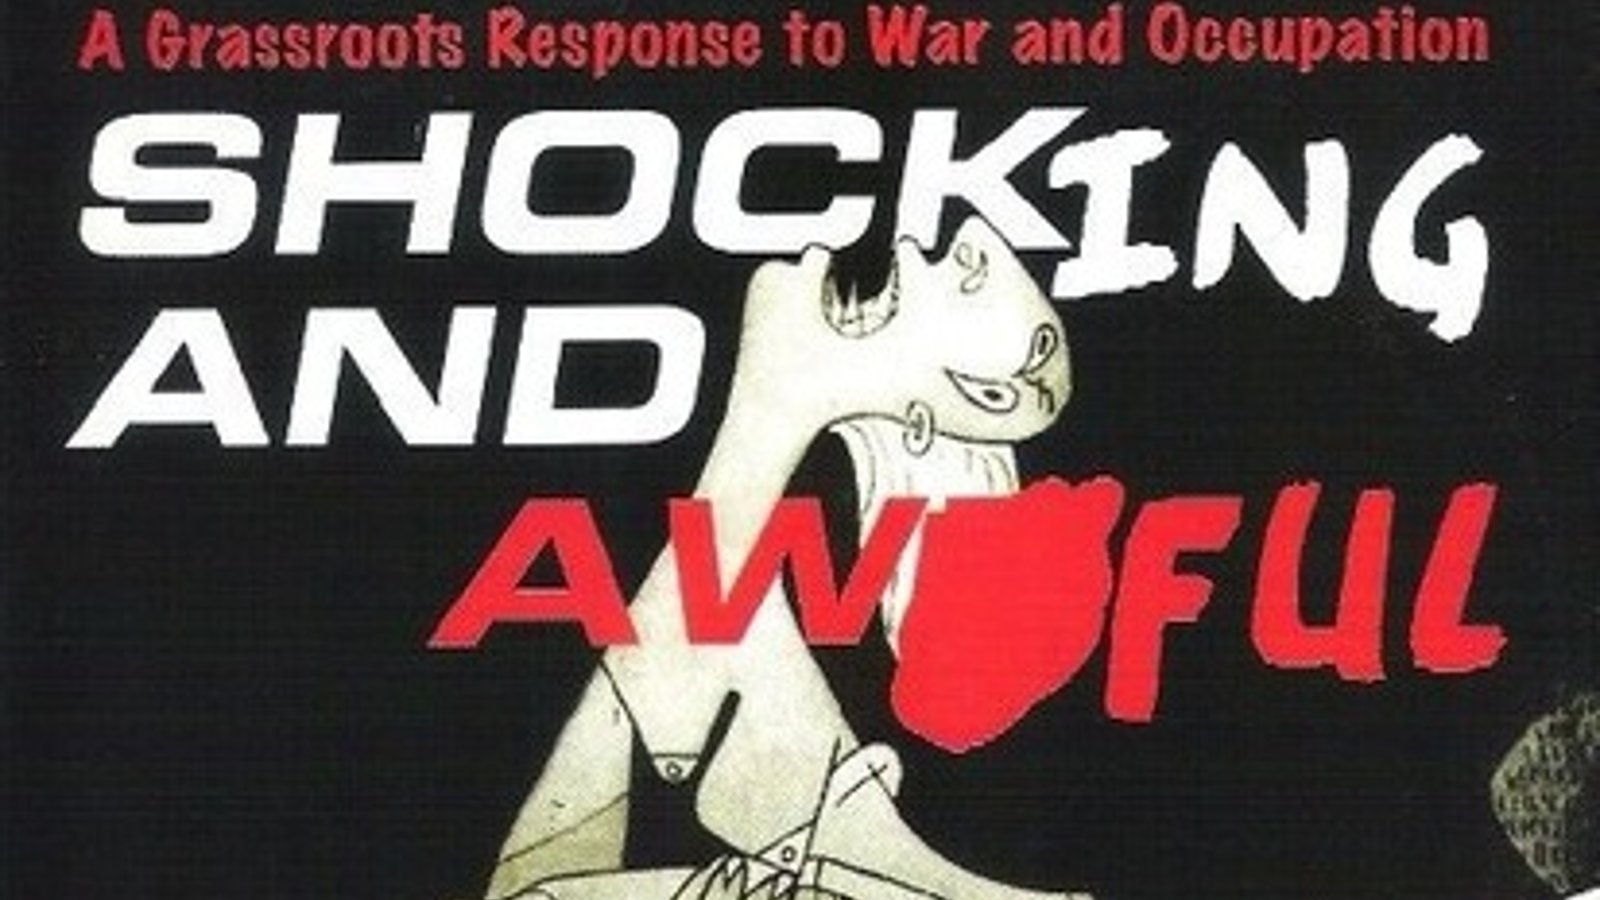 Shocking and Awful - A Grassroots Response to War and Occupation